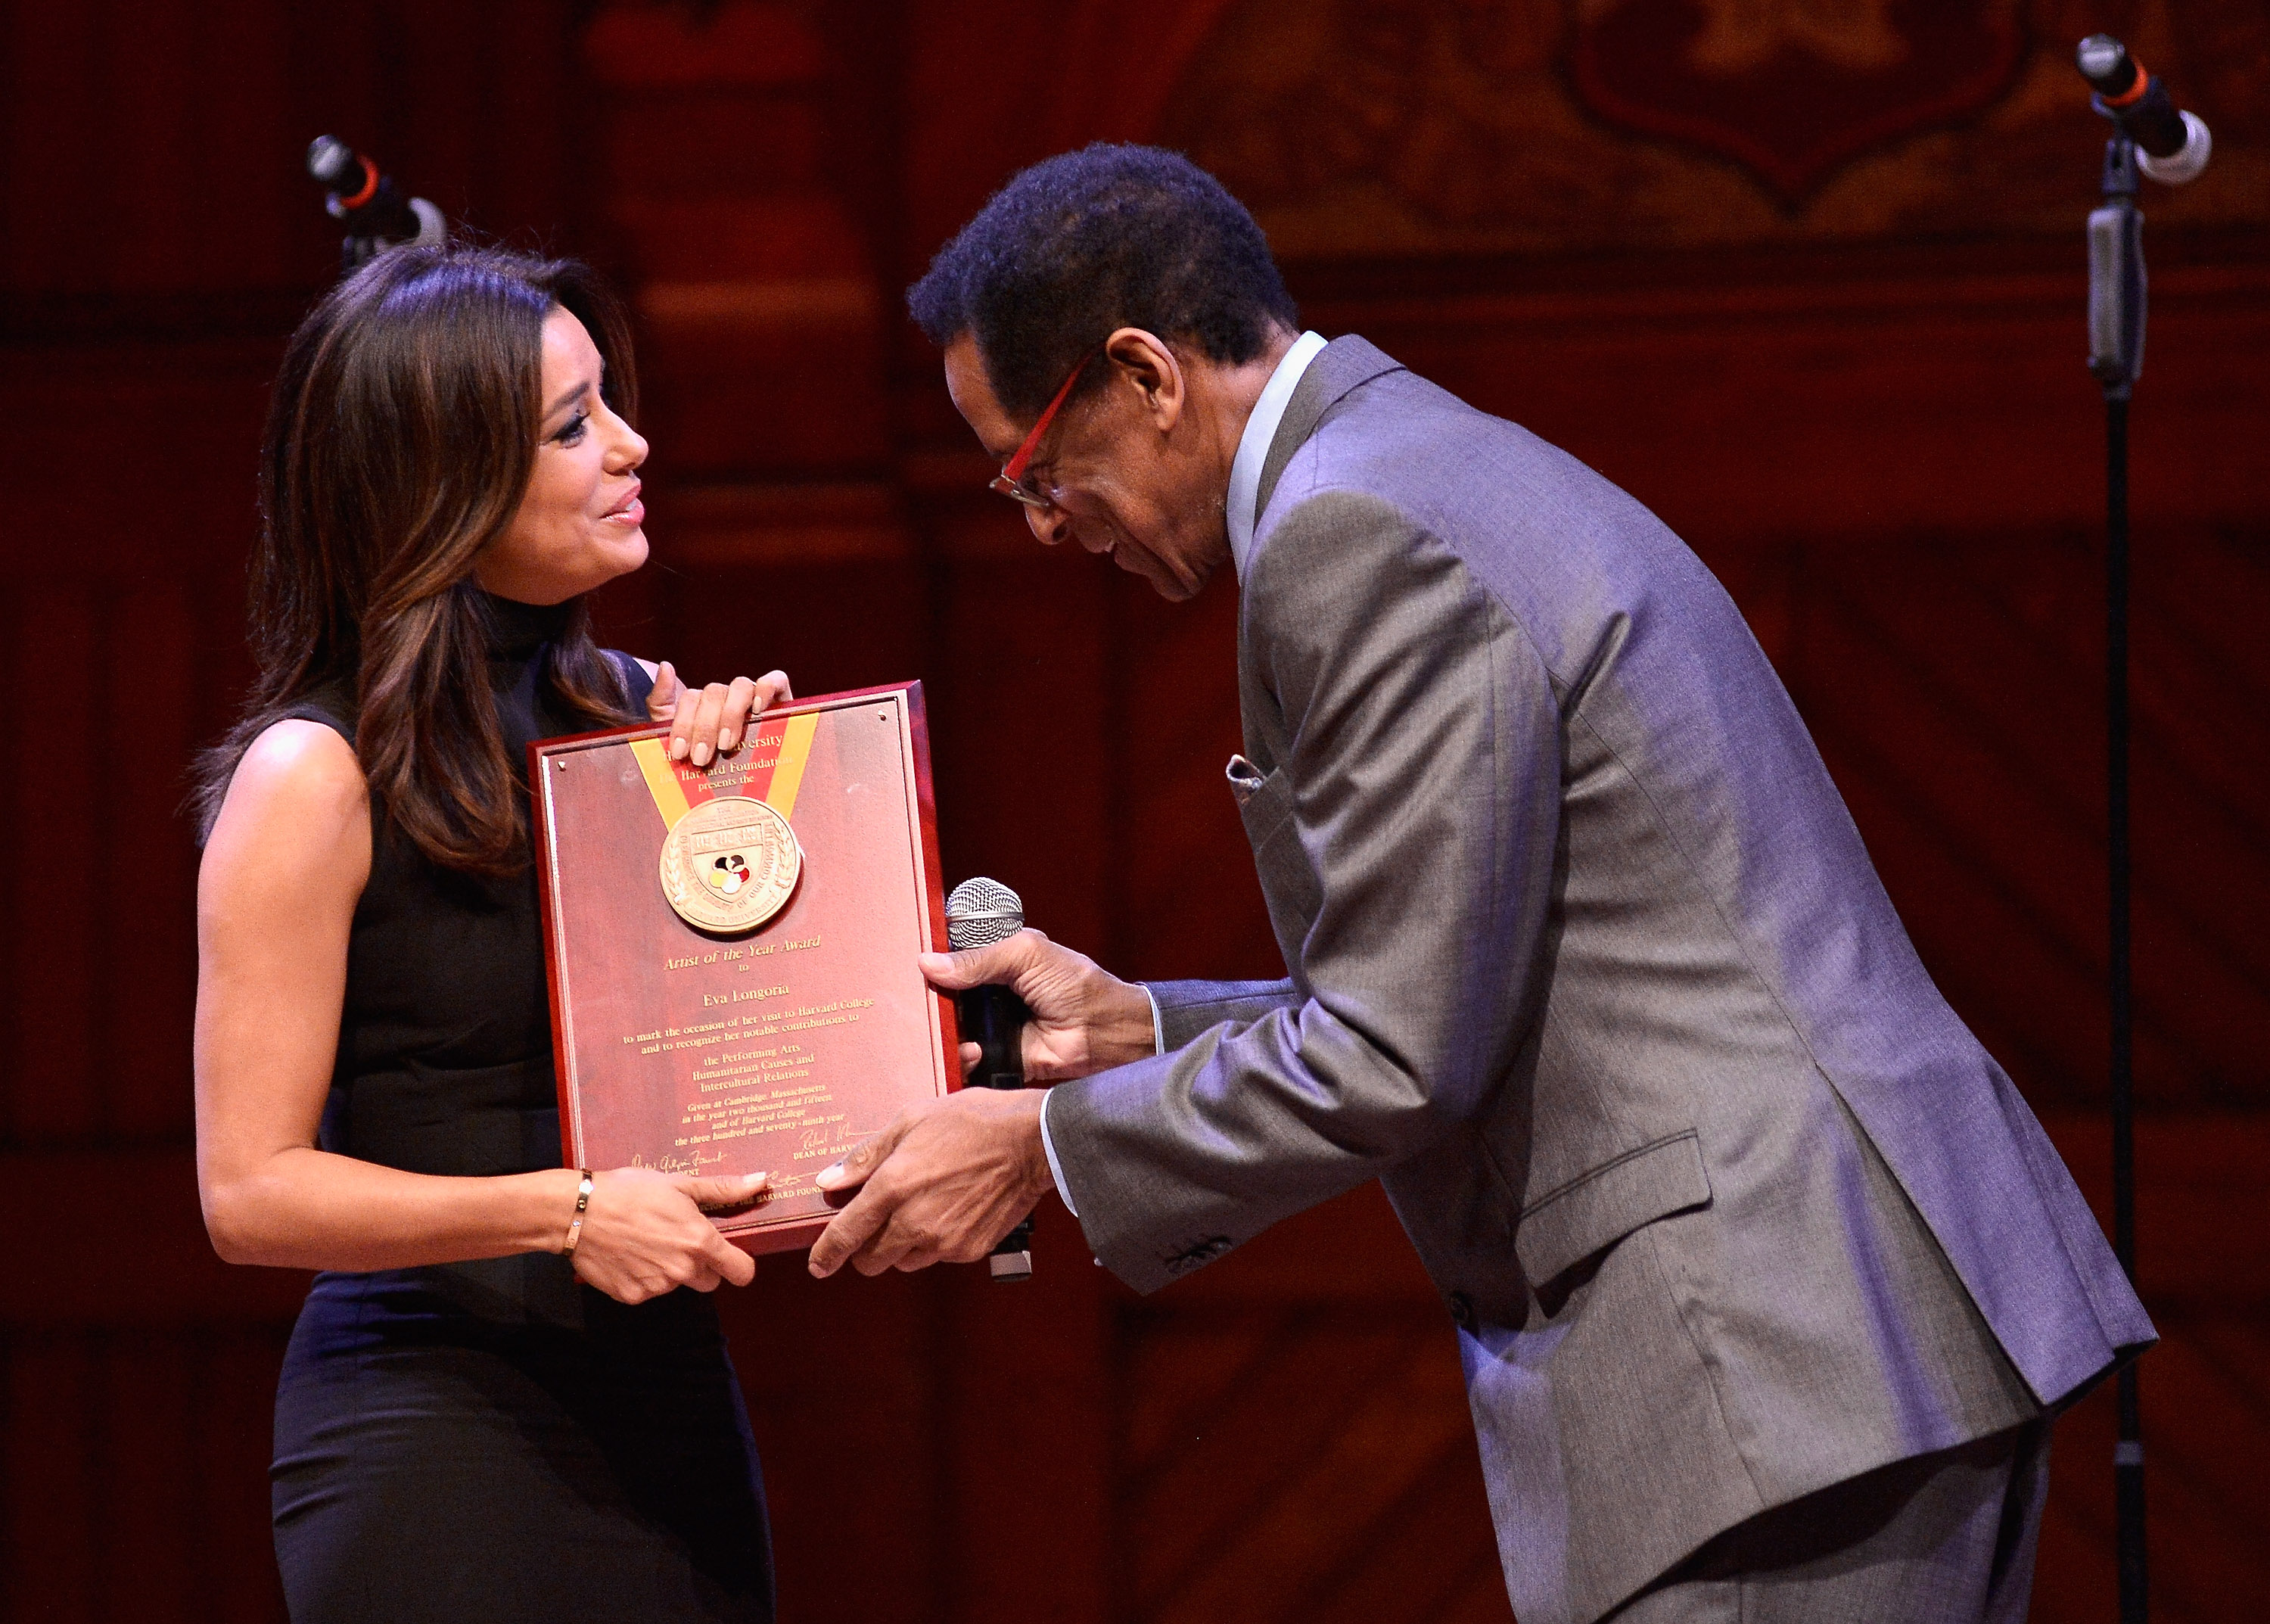 Eva Longoria receives the Harvard University Artist of the Year Award from Harvard Foundation Director Dr. S. Allen Counter in Cambridge, Massachusetts, on February 21, 2015. | Source: Getty Images